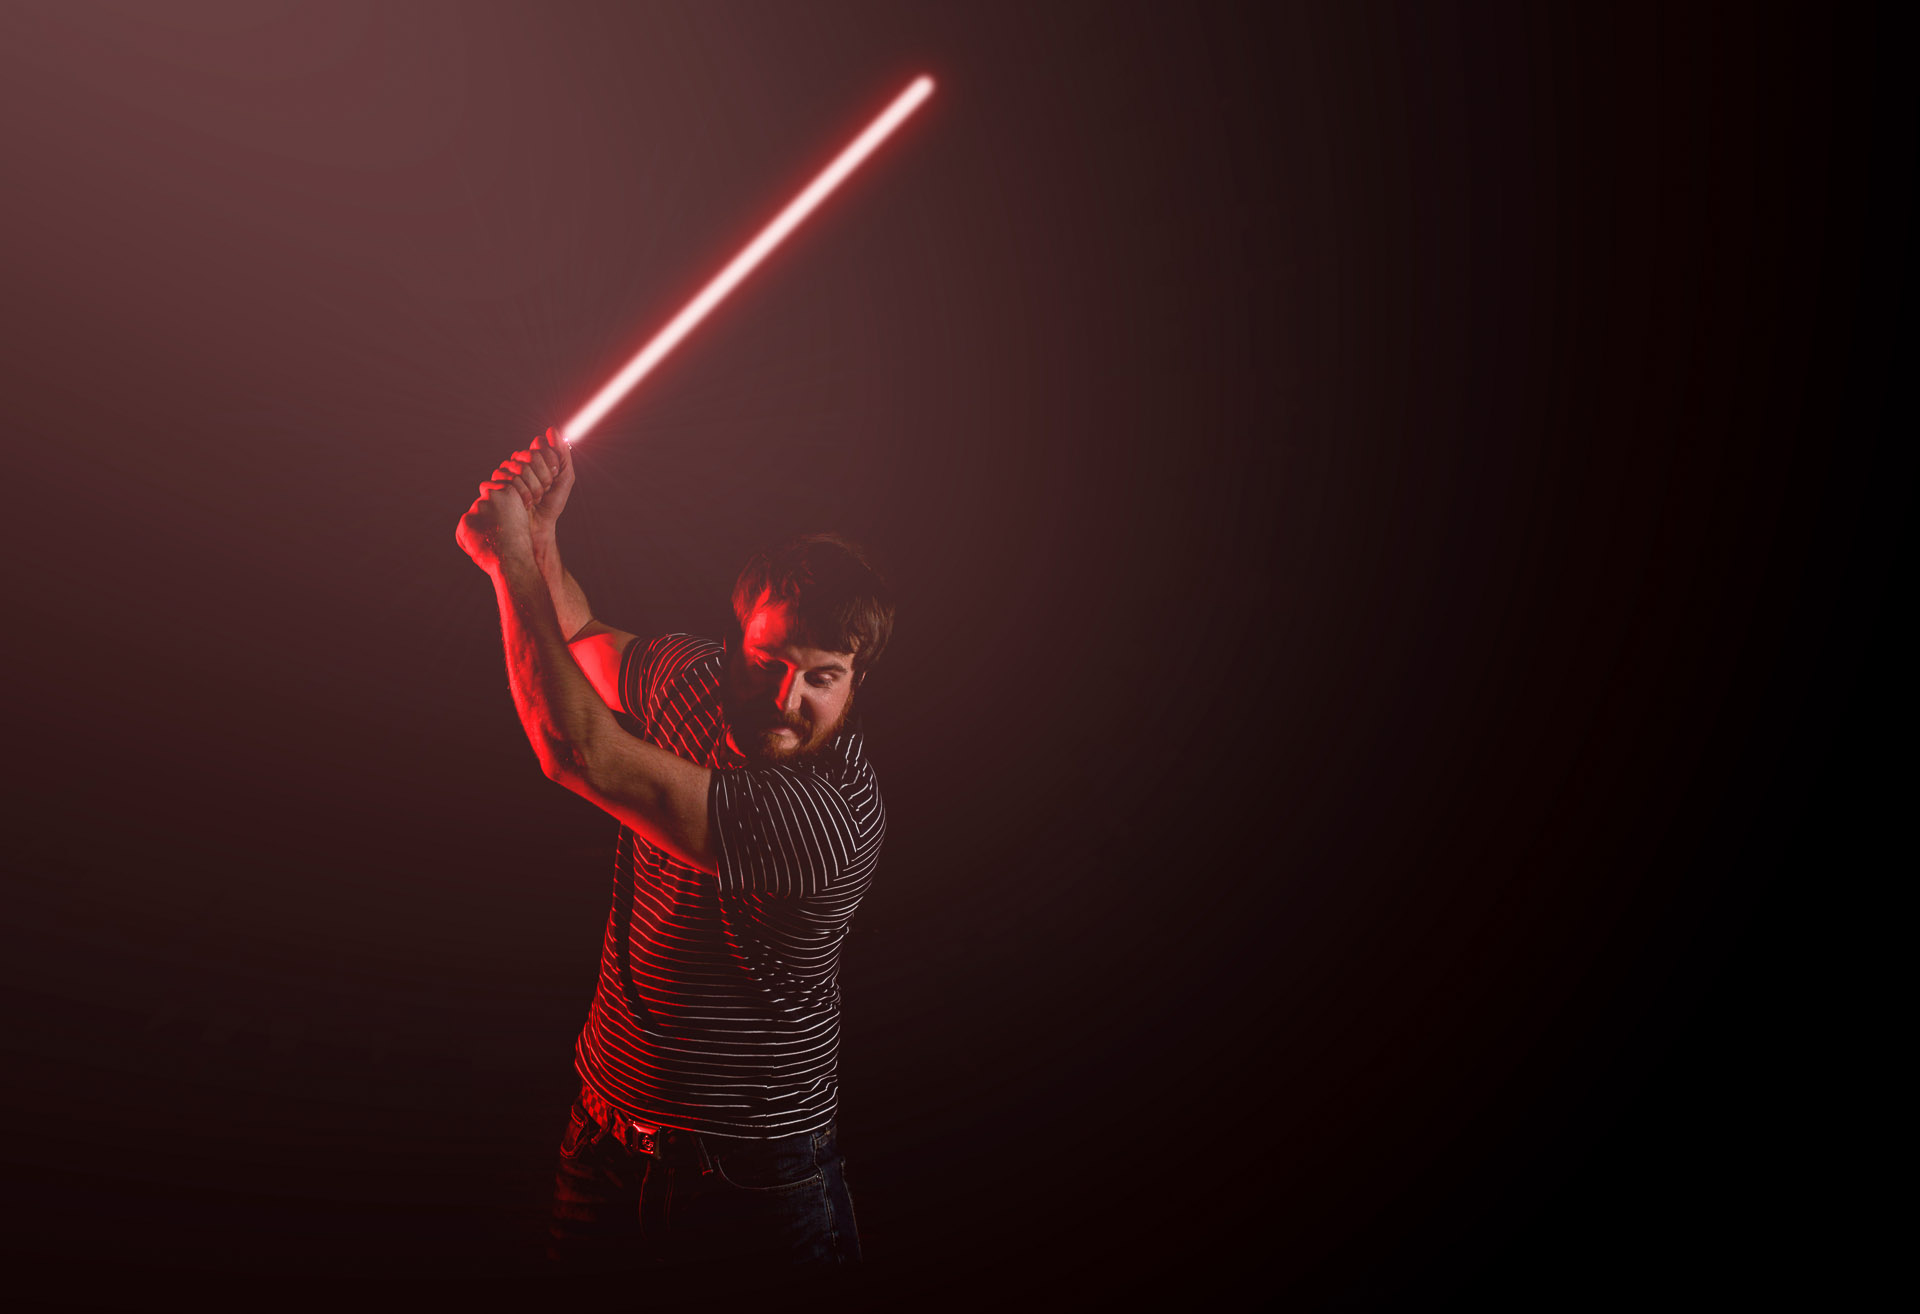 Behind the Scenes: A Star-Wars Themed Lightsaber-Wielding Portrait Picture